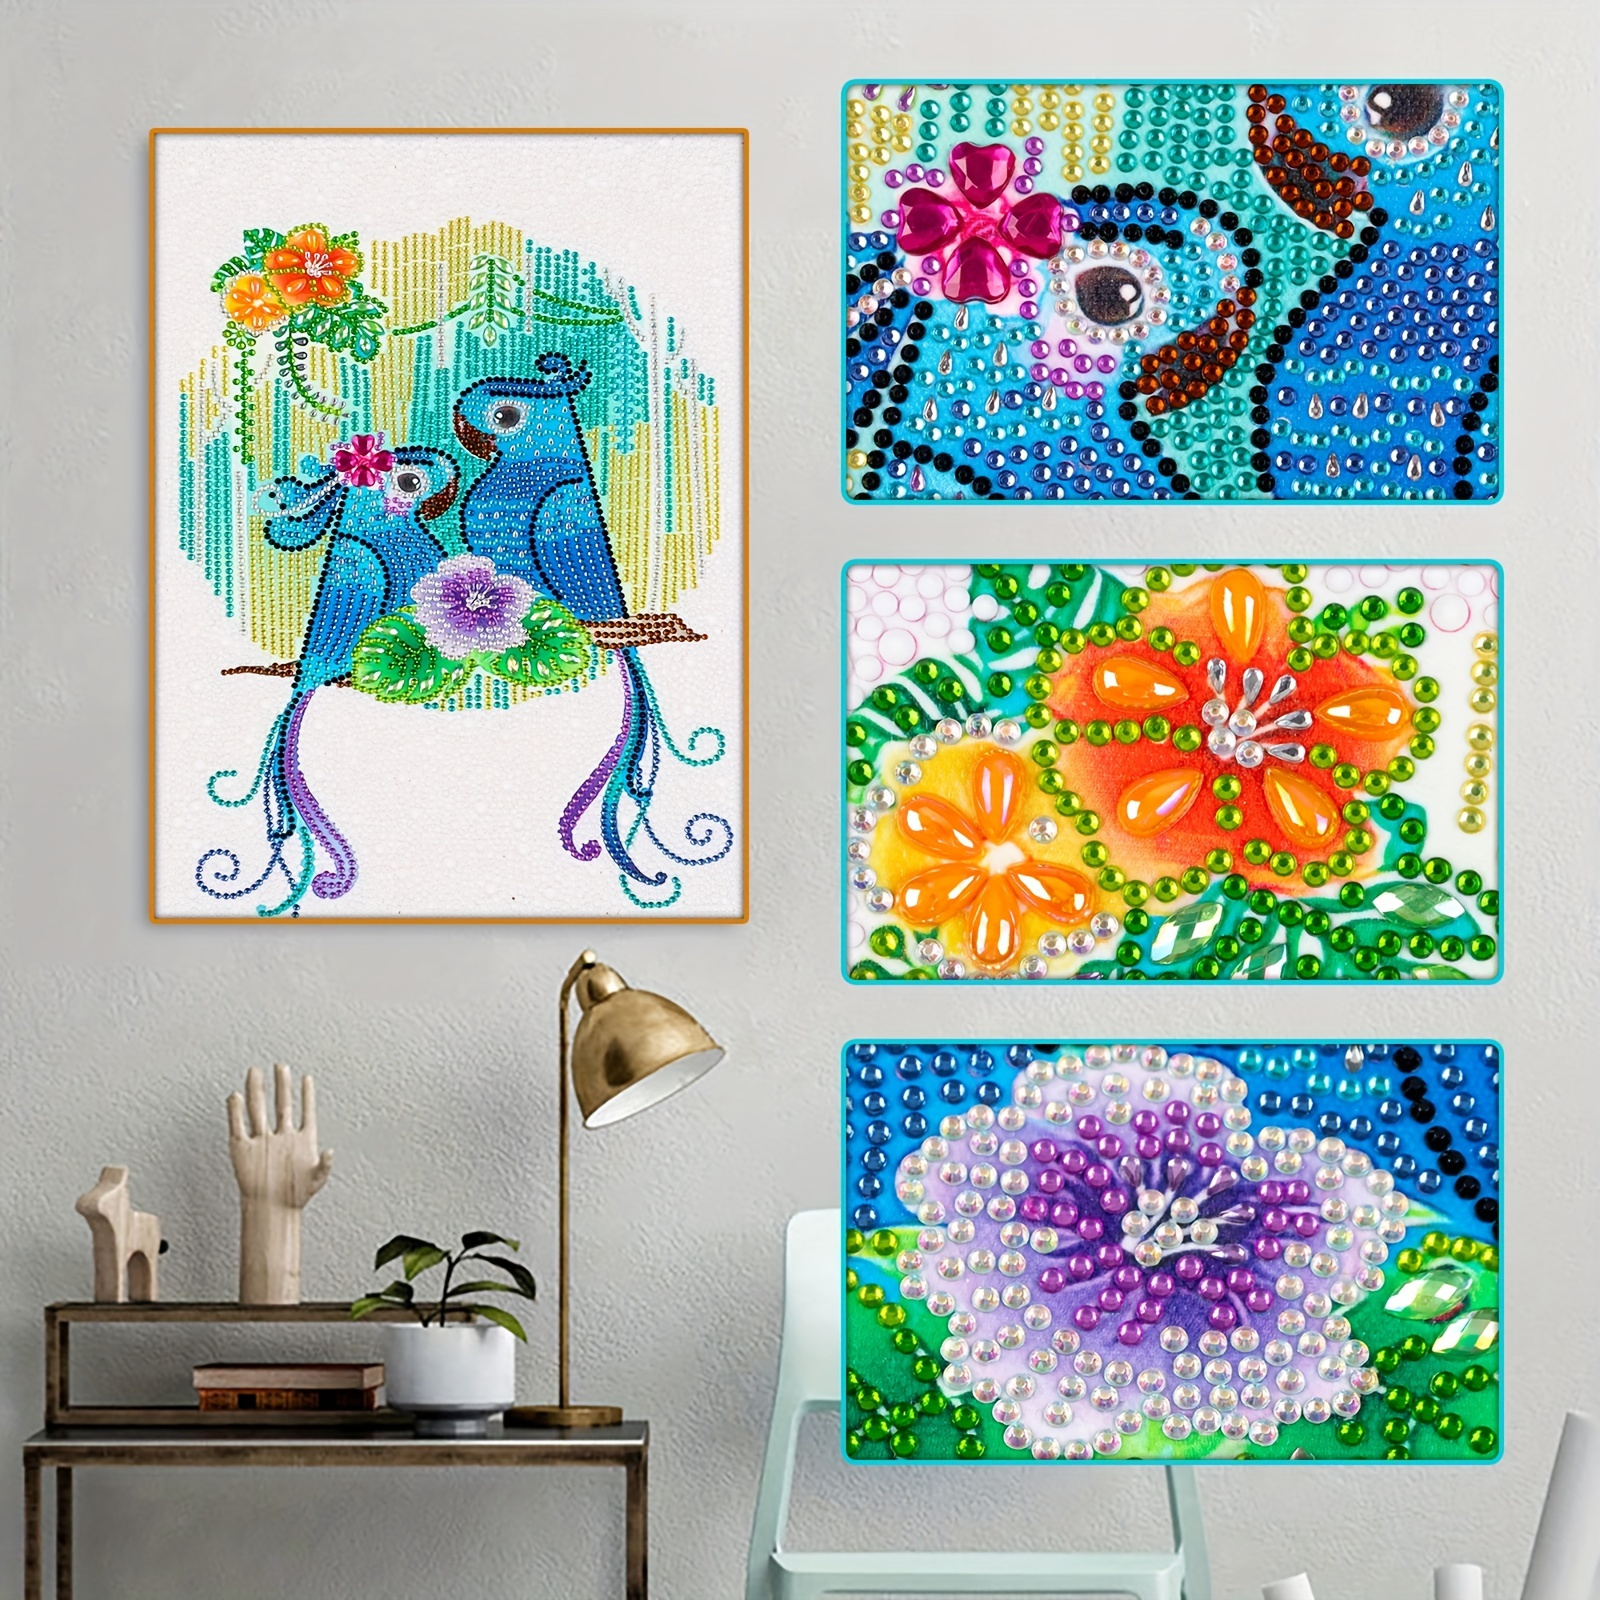 5D DIY Large Diamond Painting Kits For Adults,15.7x27.5in/40x70cm Two Cute  Parrots Round Full Diamond Diamond Art Kits Picture By Number Kits For Home